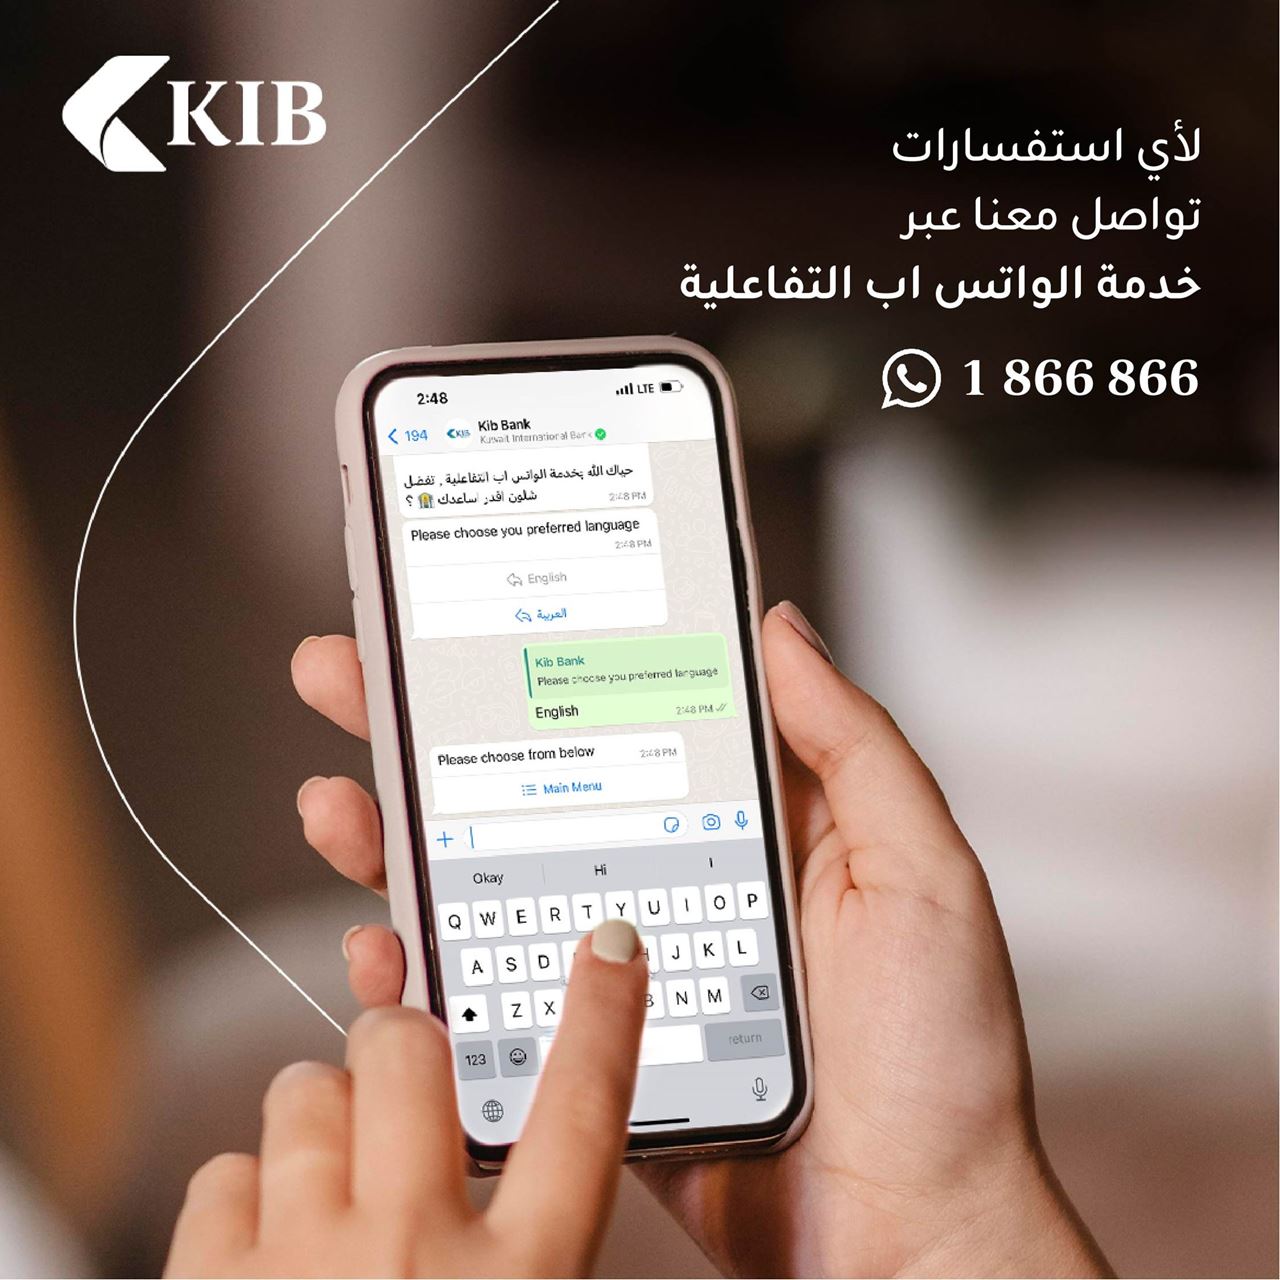 KIB introduces new and enhanced contact center features